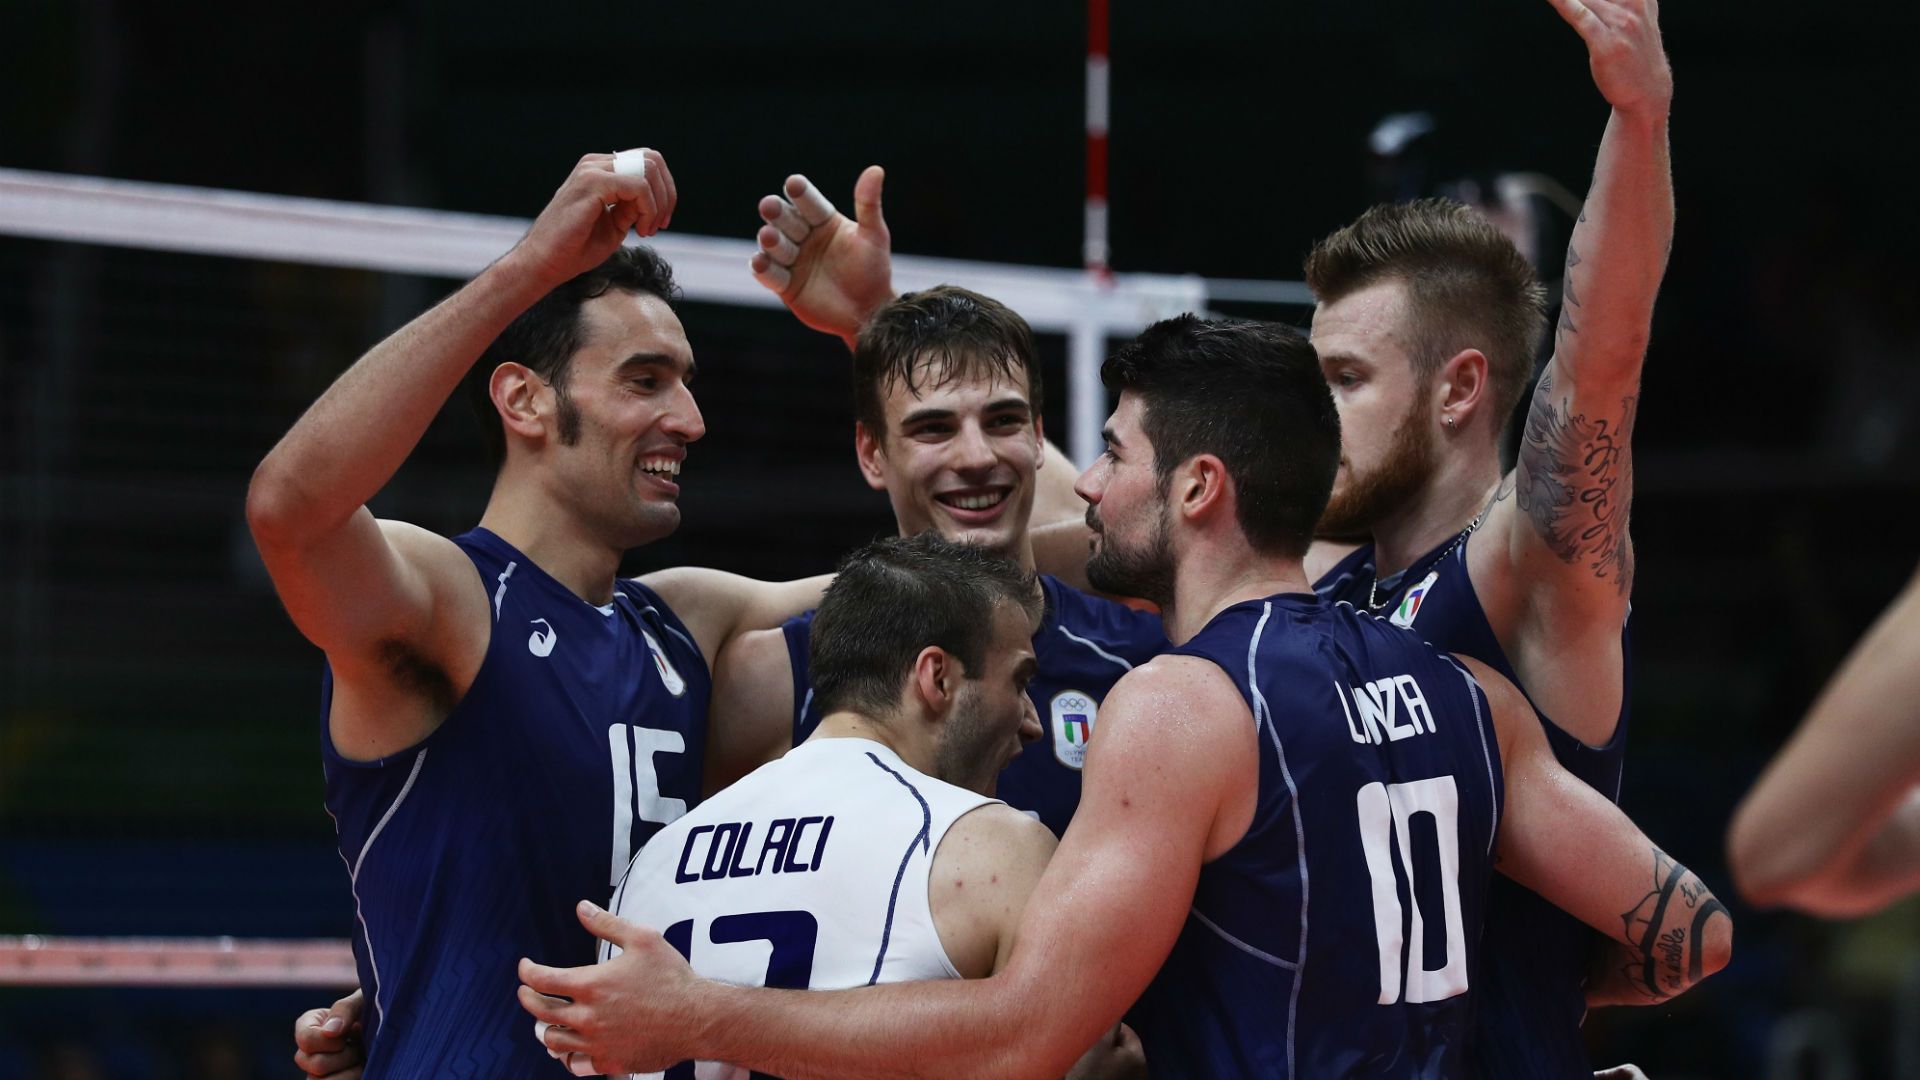 Italy storms back to beat USA men's volleyball team